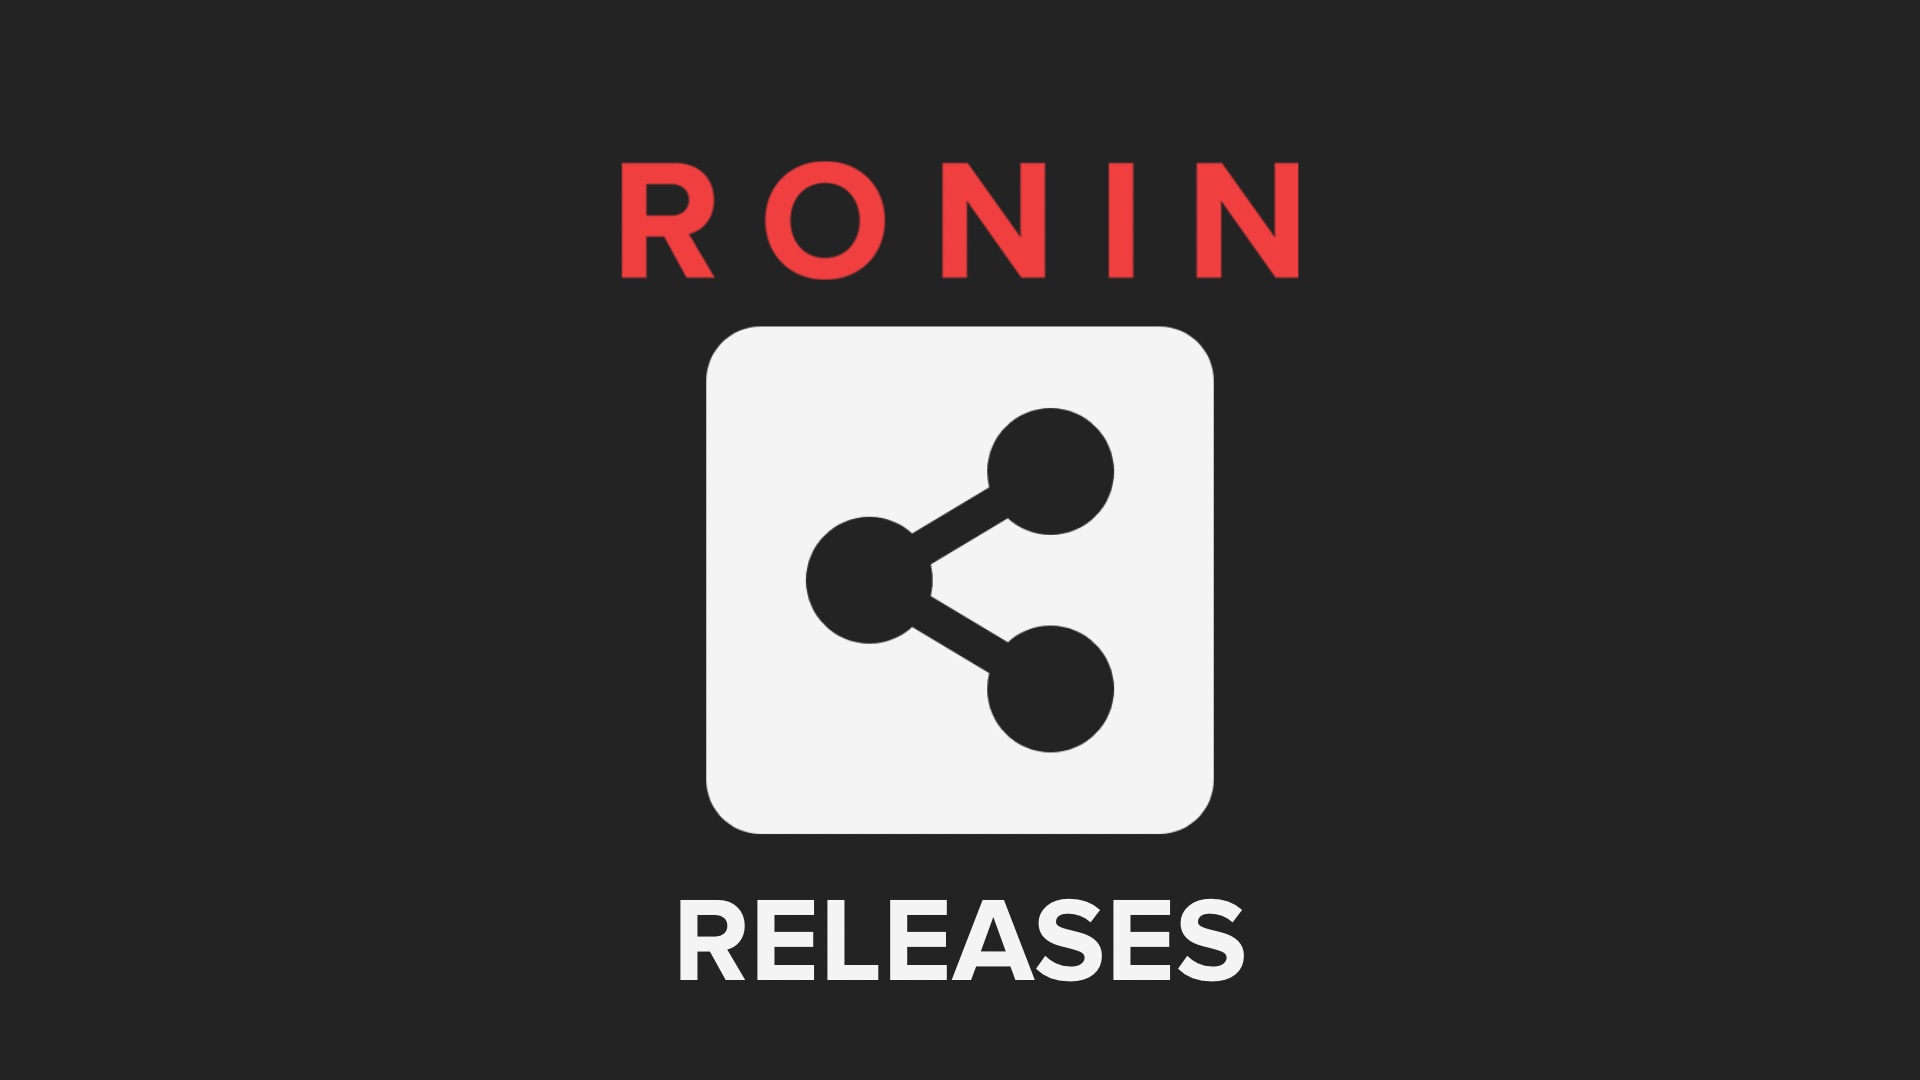 RONIN Releases